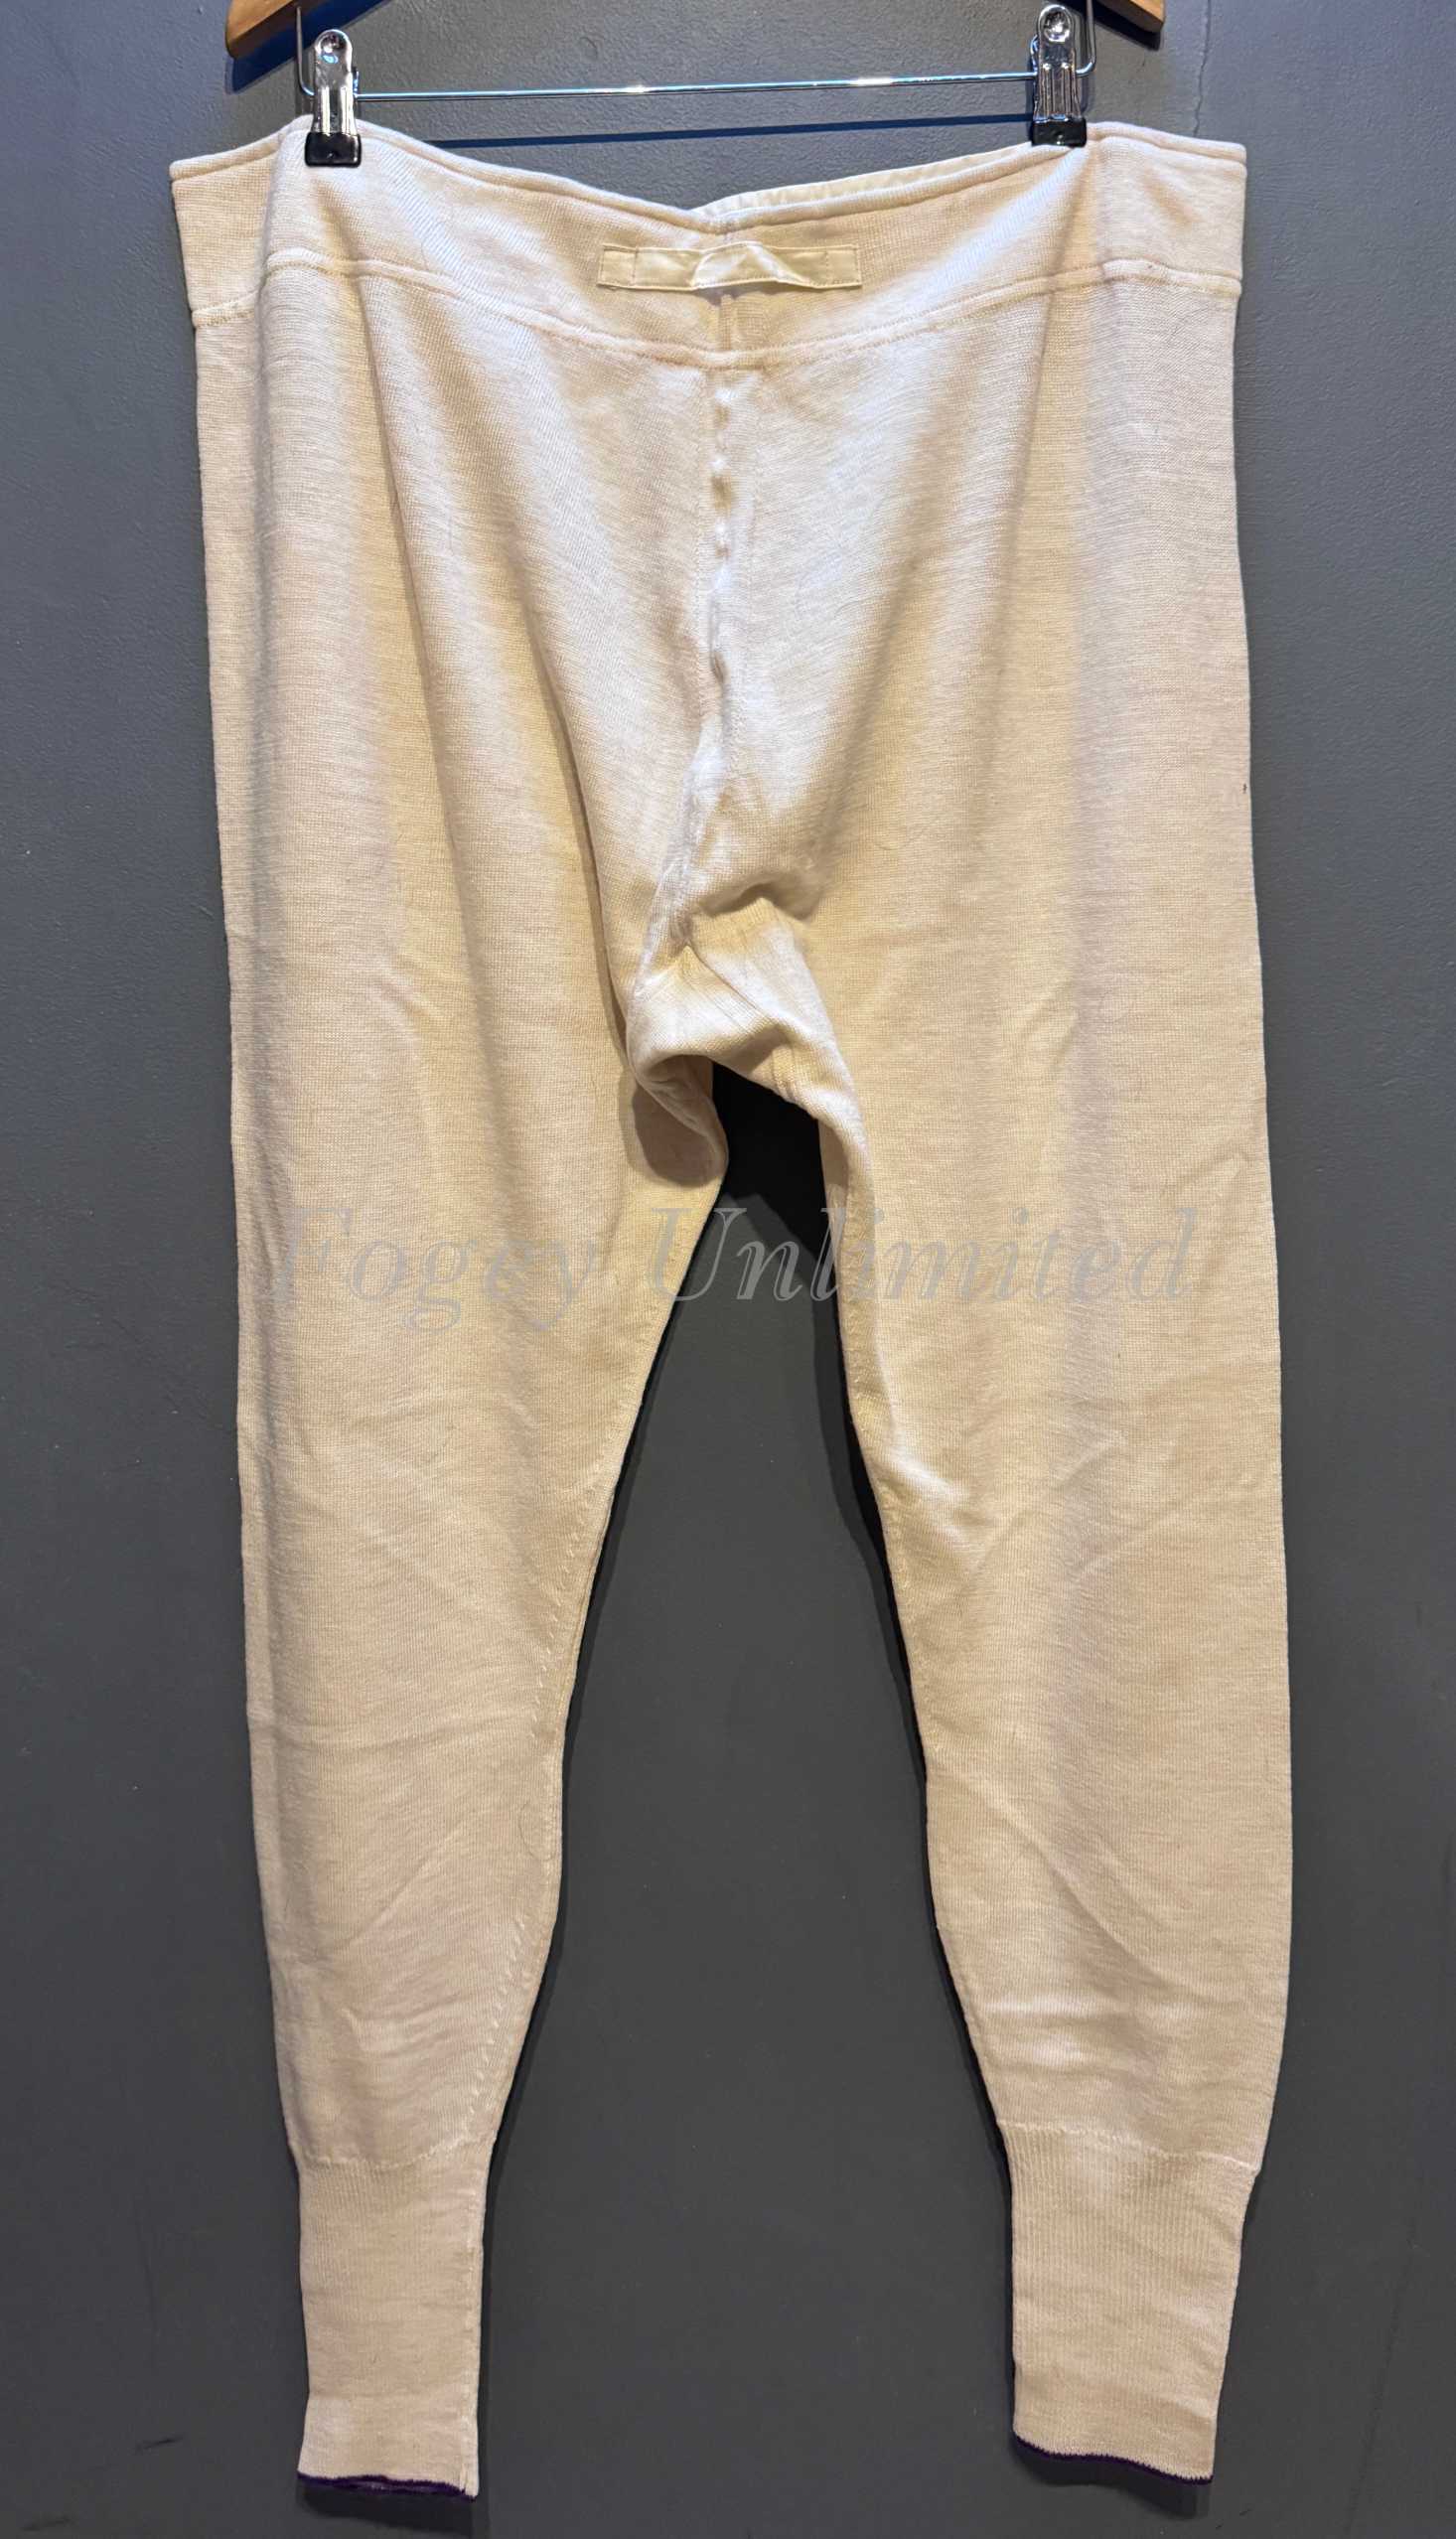 Traditional Long Johns with Yoke/button front and Brace Tapes